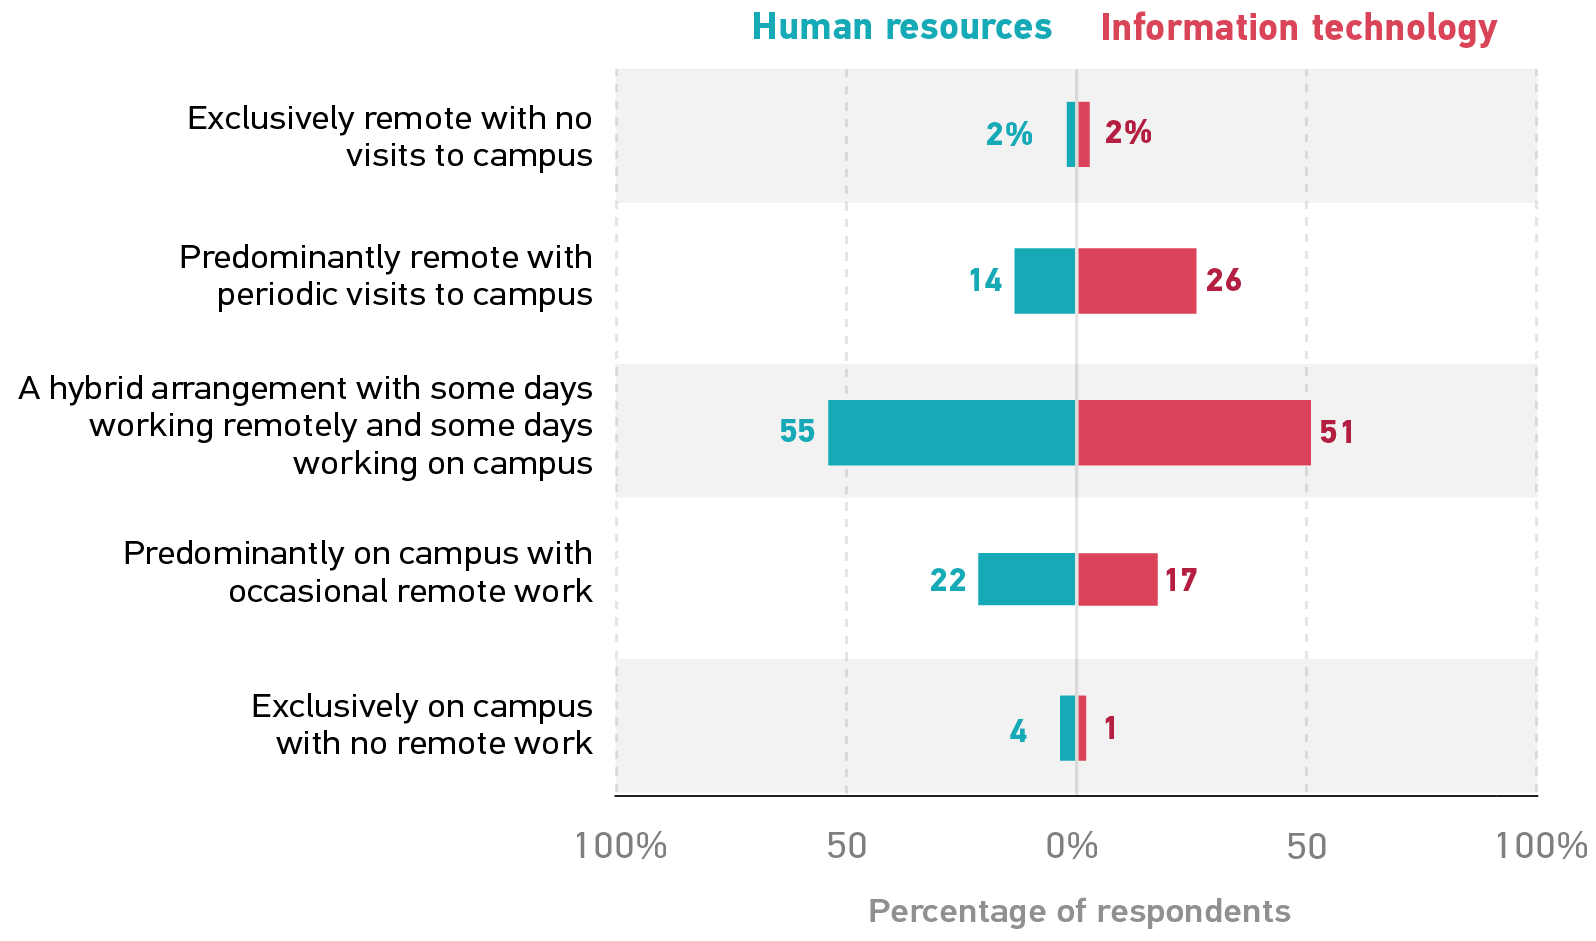 bar graph showing the percentage of HR and IT leadership who responded in each category. 
Exclusively remote with no visits to campus : HR 2%, IT 2%. 
Predominantly remote with periodic visits to campus: HR 14%, IT 26%. 
A hybrid arrangement with some days working remotely and some days working on campus: HR 55%, IT 51%. 
Predominantly on campus with occasional remote work: HR 22%, IT 17%. 
Exclusively on campus with no remote work: HR 4%, IT 1%. 